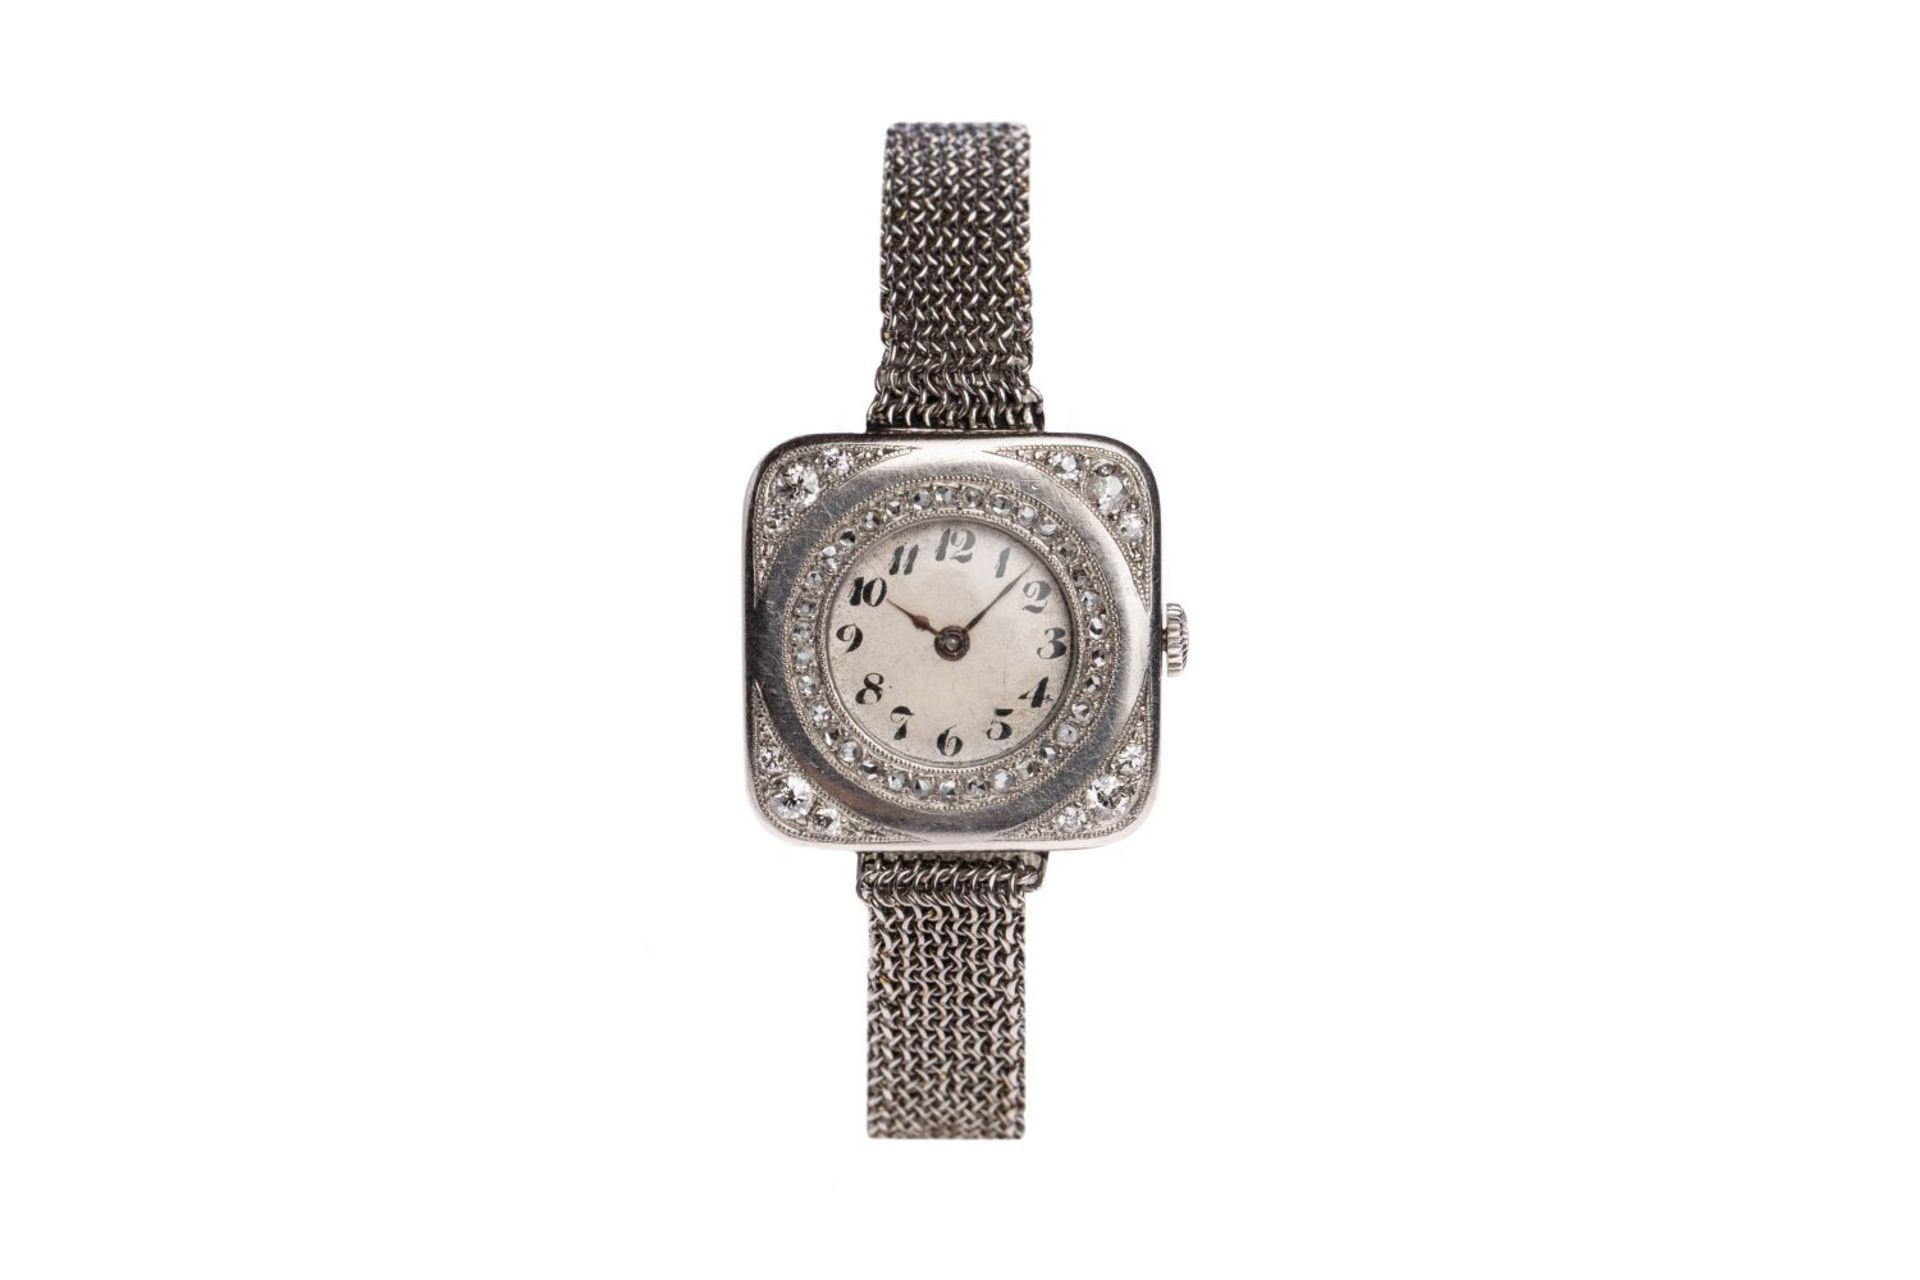 Art Deco Ladies Watch PlatinSmall ladies watch made of platinum with diamonds lozenges approx. 0.9